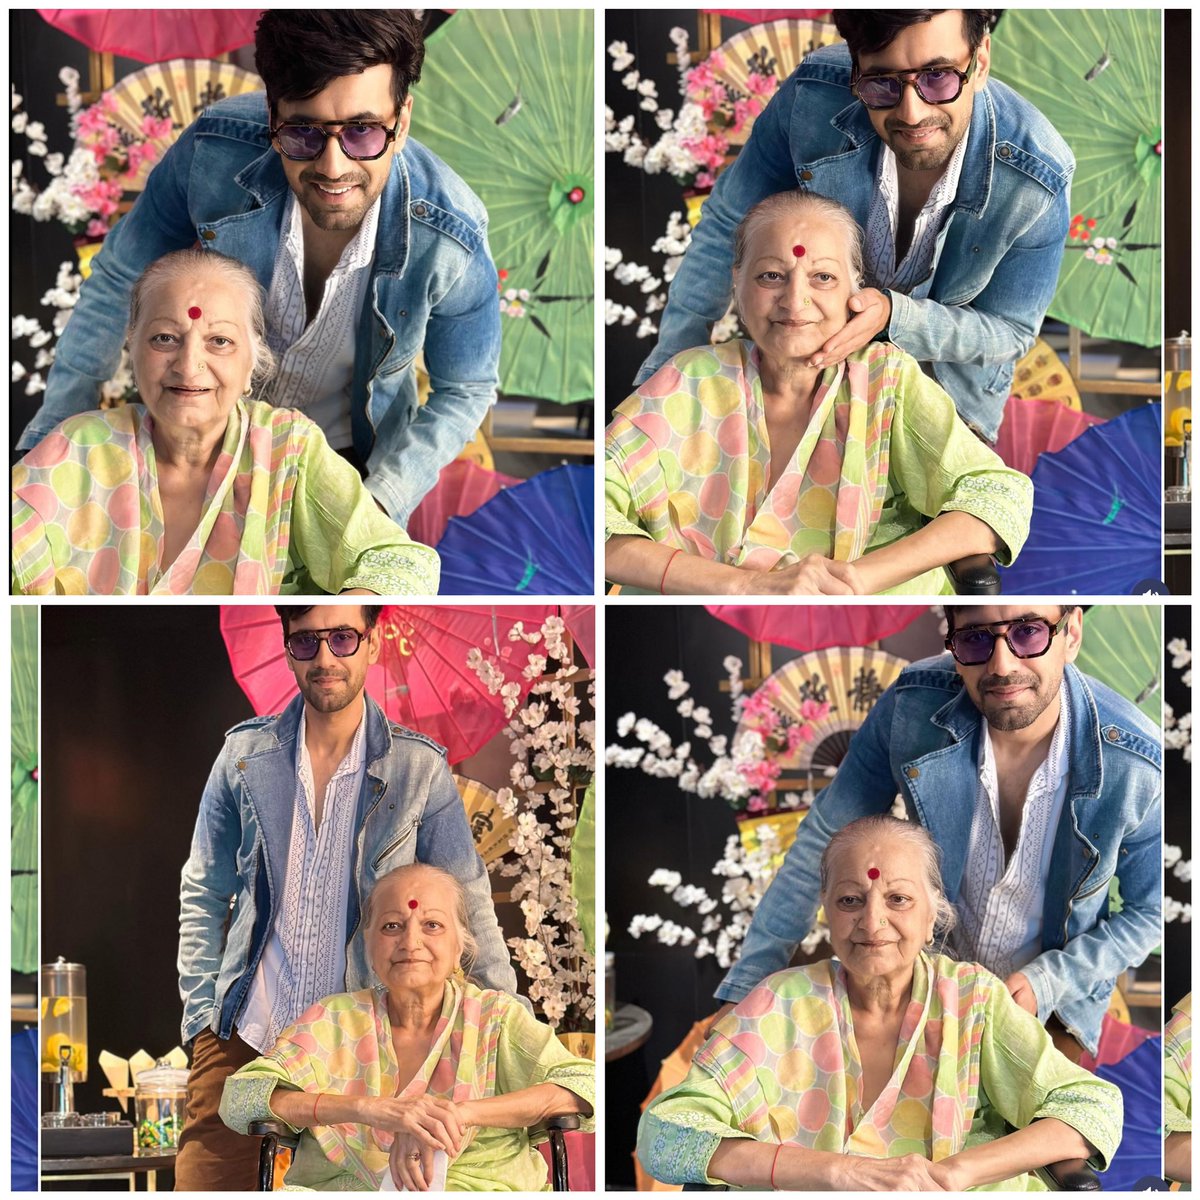 The most Beautiful, Sweetest and Cutest Mum n Son duo’s with the most ever Gorgeous Smiles May Matarani always keep you that way 🙏🏼💜🧿 Wishing Auntie a Happy Mother’s Day Wishing lots of love, happiness, good health n blessings 🥰💜💜💜💞🍀🧿 #KaranvirSharma @karanvirsharma9